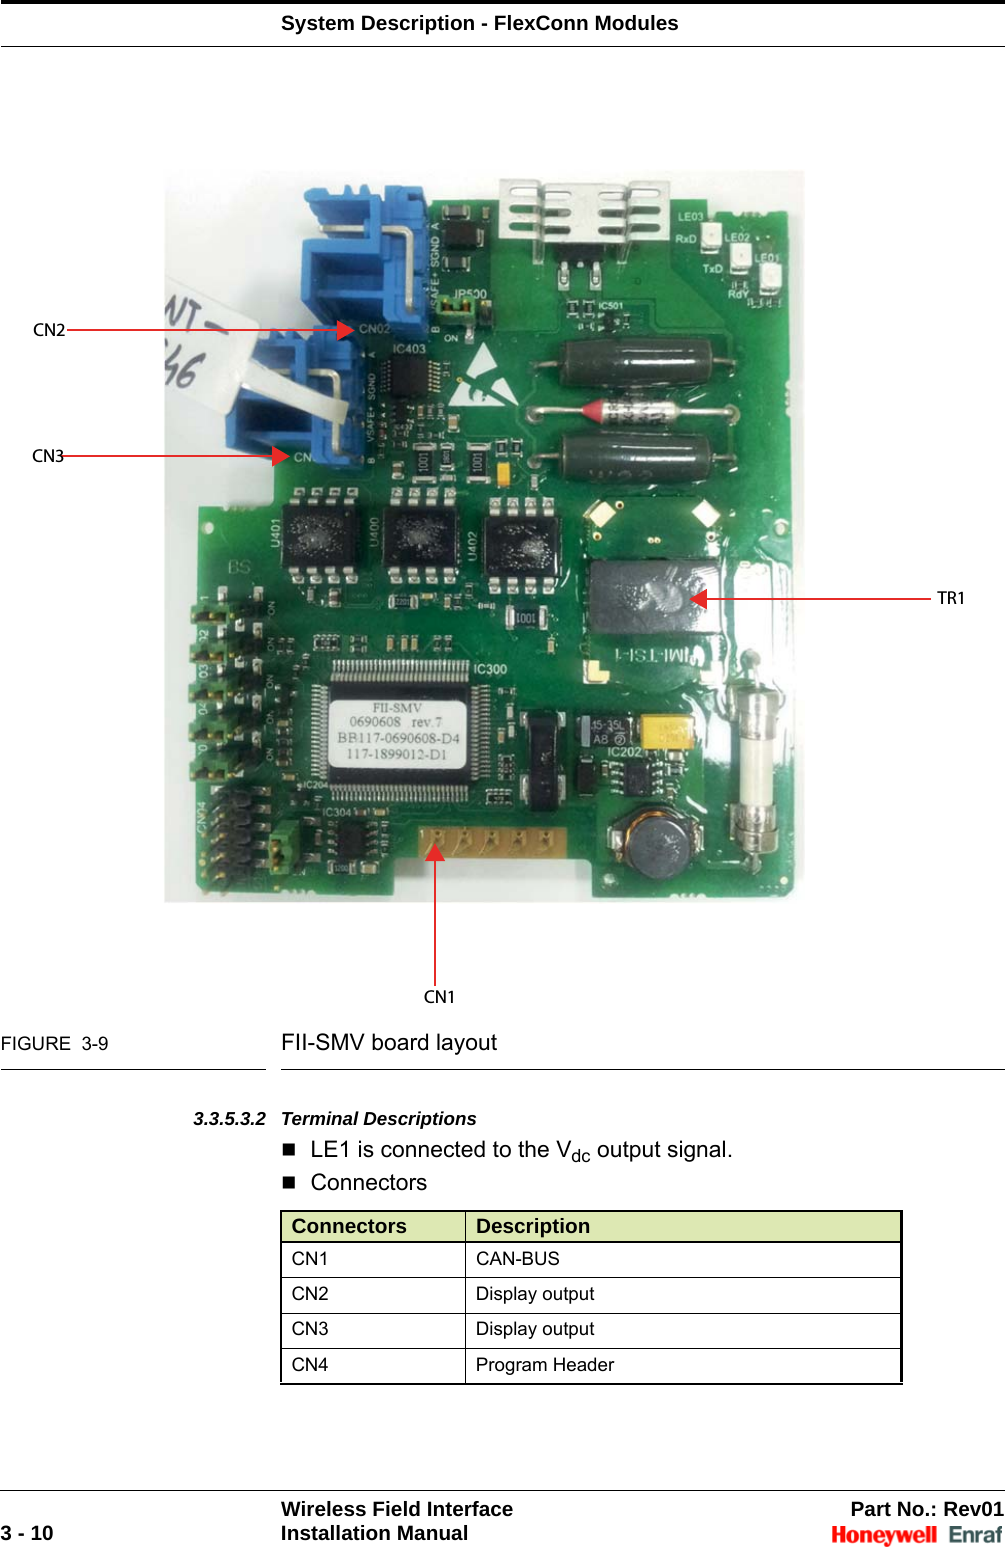 System Description - FlexConn ModulesWireless Field Interface Part No.: Rev013 - 10 Installation ManualFIGURE  3-9 FII-SMV board layout3.3.5.3.2 Terminal DescriptionsLE1 is connected to the Vdc output signal.Connectors Connectors DescriptionCN1 CAN-BUSCN2 Display outputCN3 Display outputCN4 Program HeaderCN2CN3CN1TR1